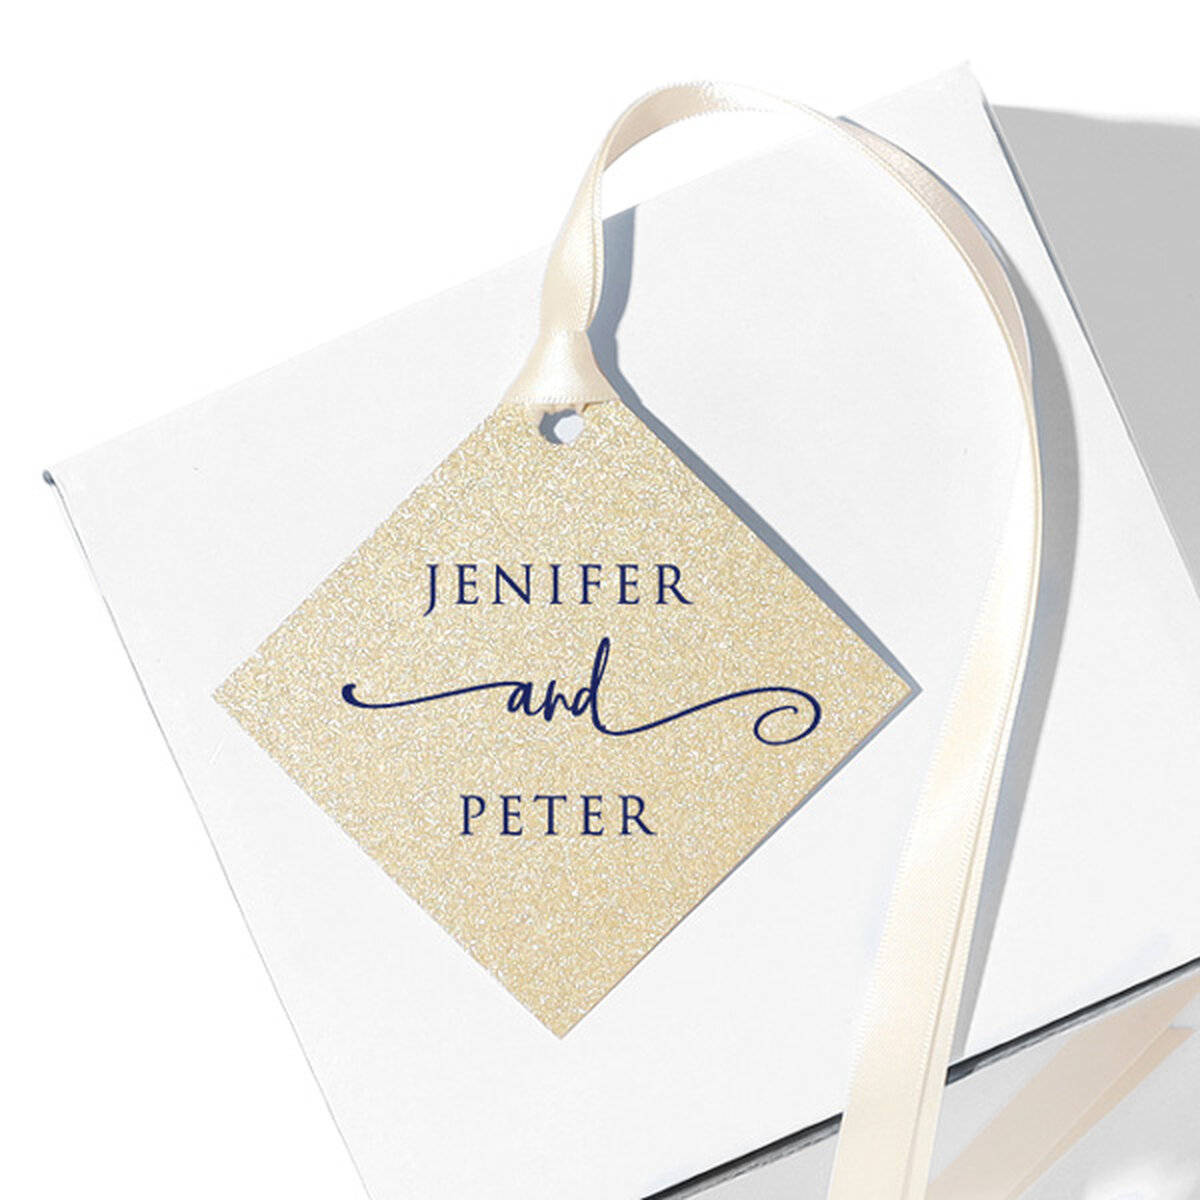 Gigantic Paper Tags Giant Tags Large Tags White Wedding Tags Wedding Favor  Tags Huge Tags Very Big Paper Tags Gift Tags Great Tags Massive 